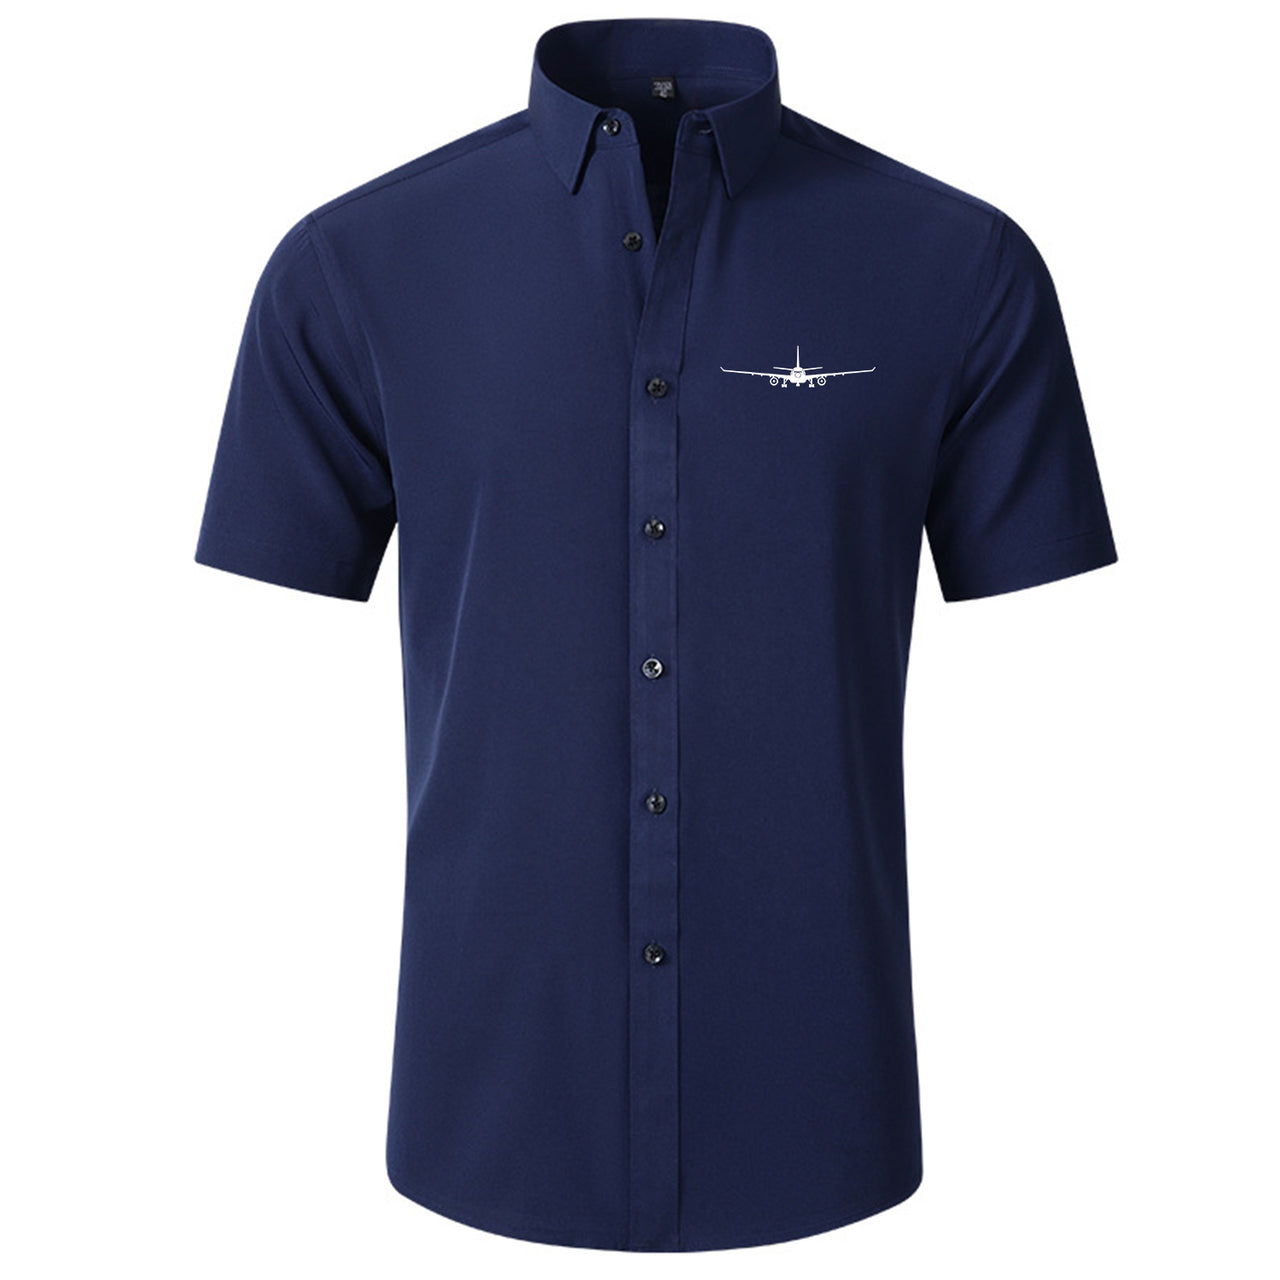 Airbus A330 Silhouette Designed Short Sleeve Shirts